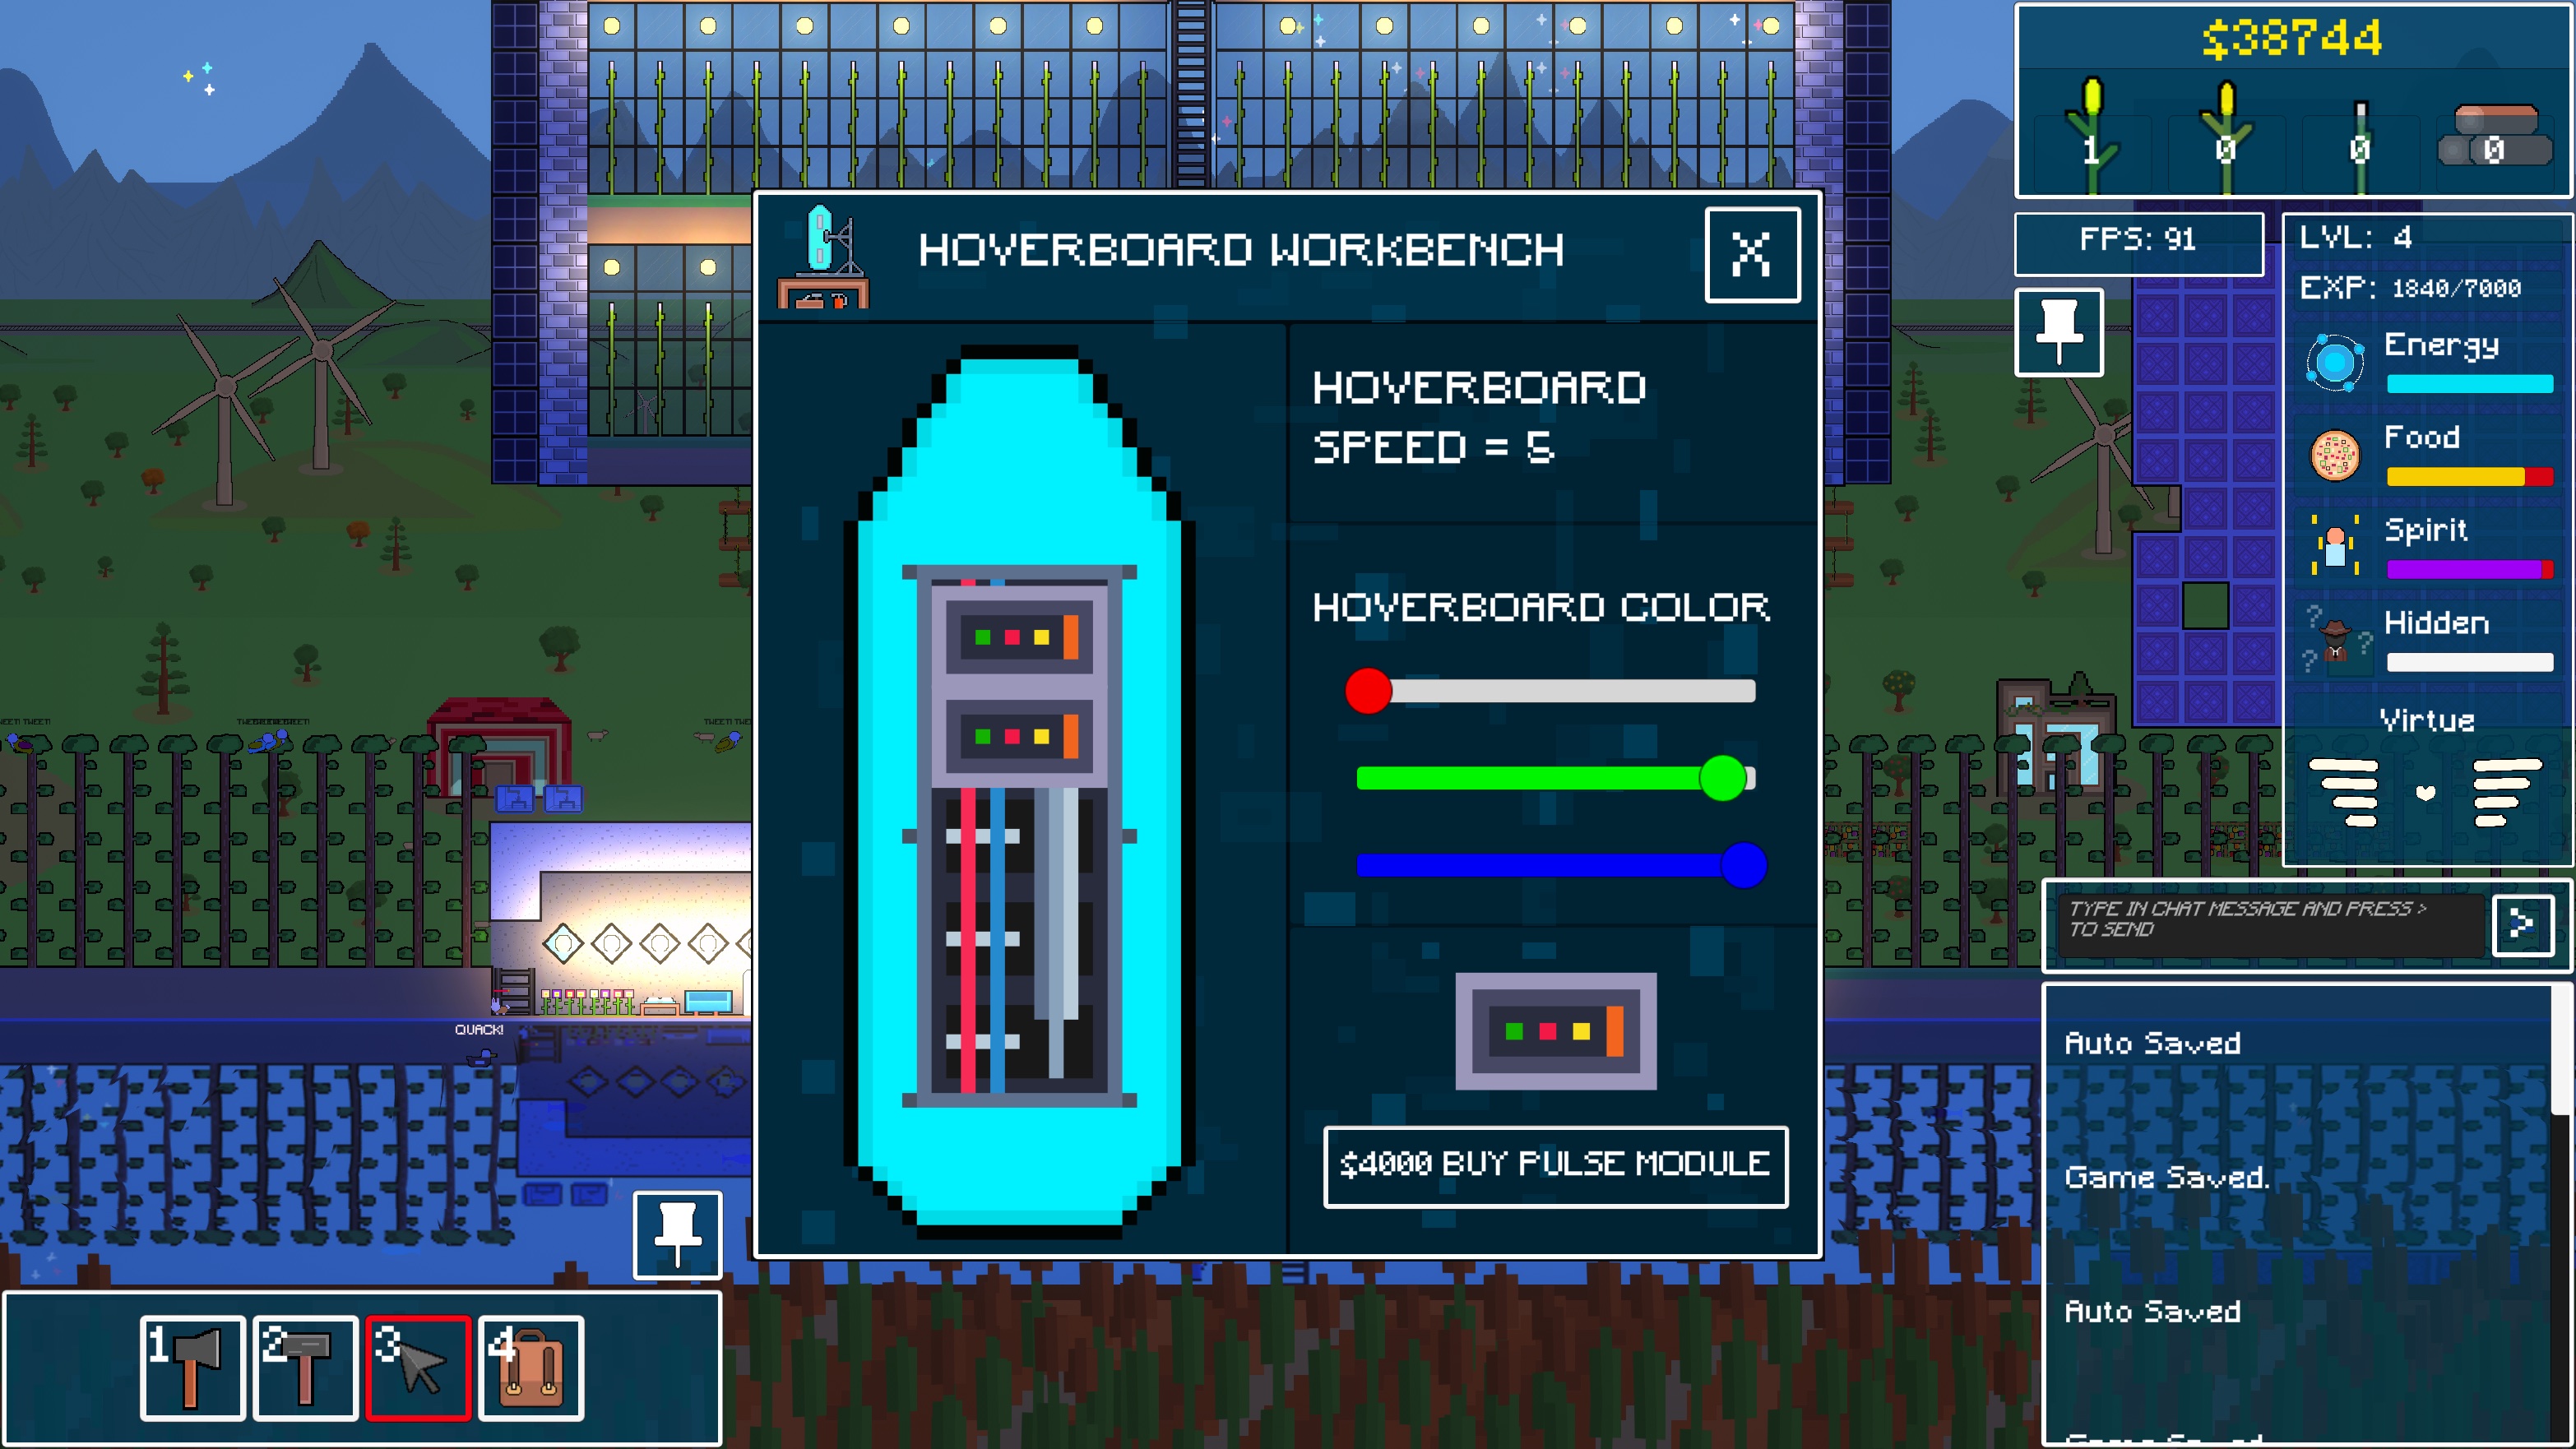 Hoverboard workbench Oct 2022